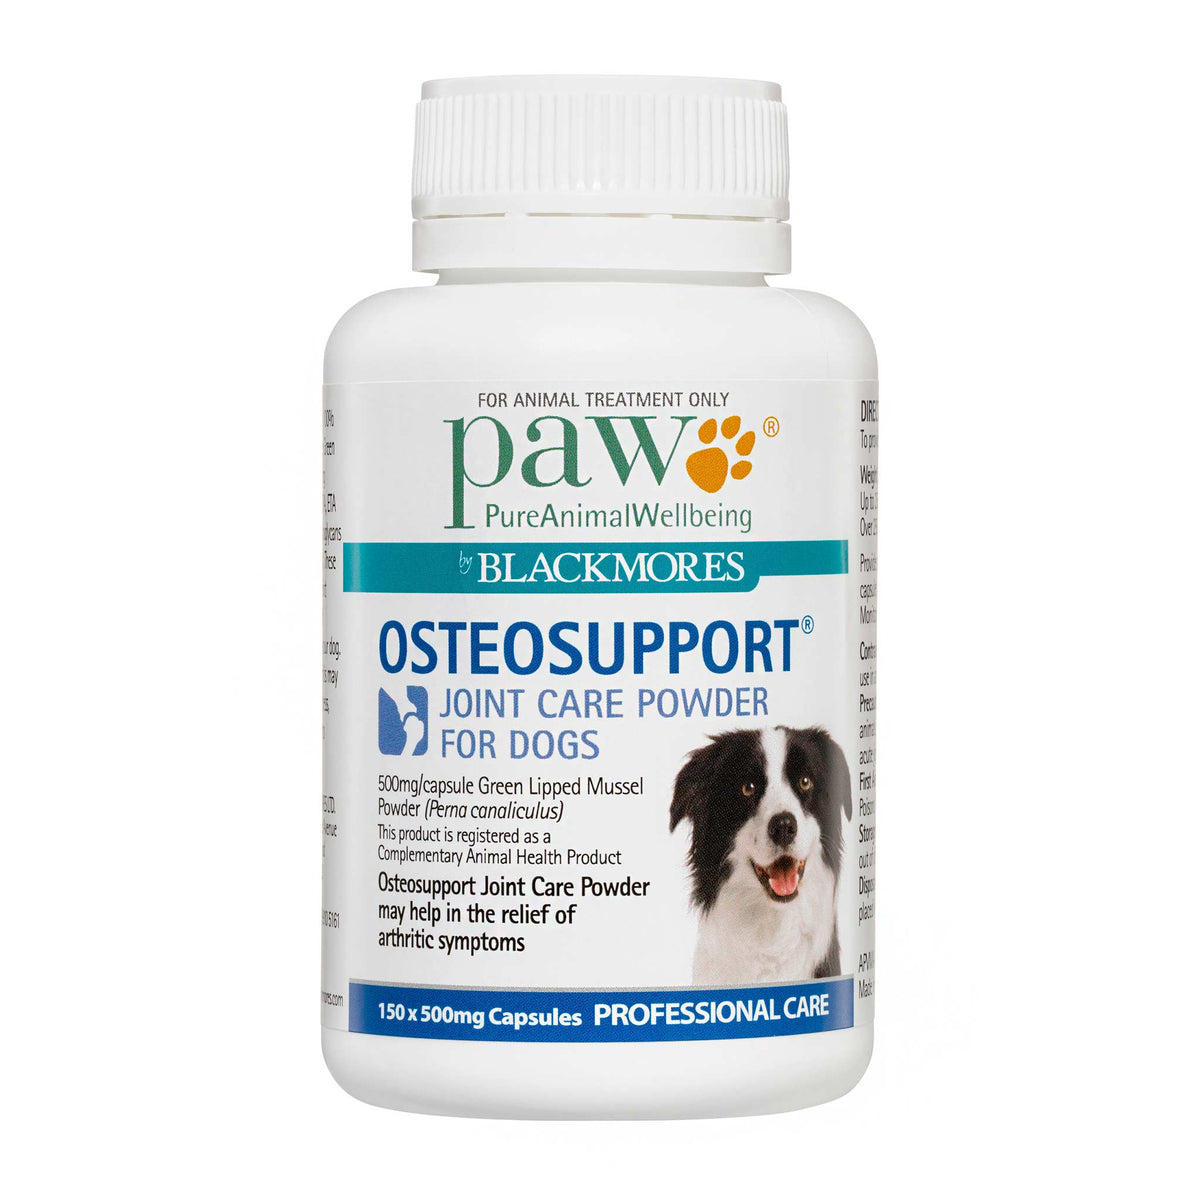 PAW Osteosupport Joint Care Powder for Dogs